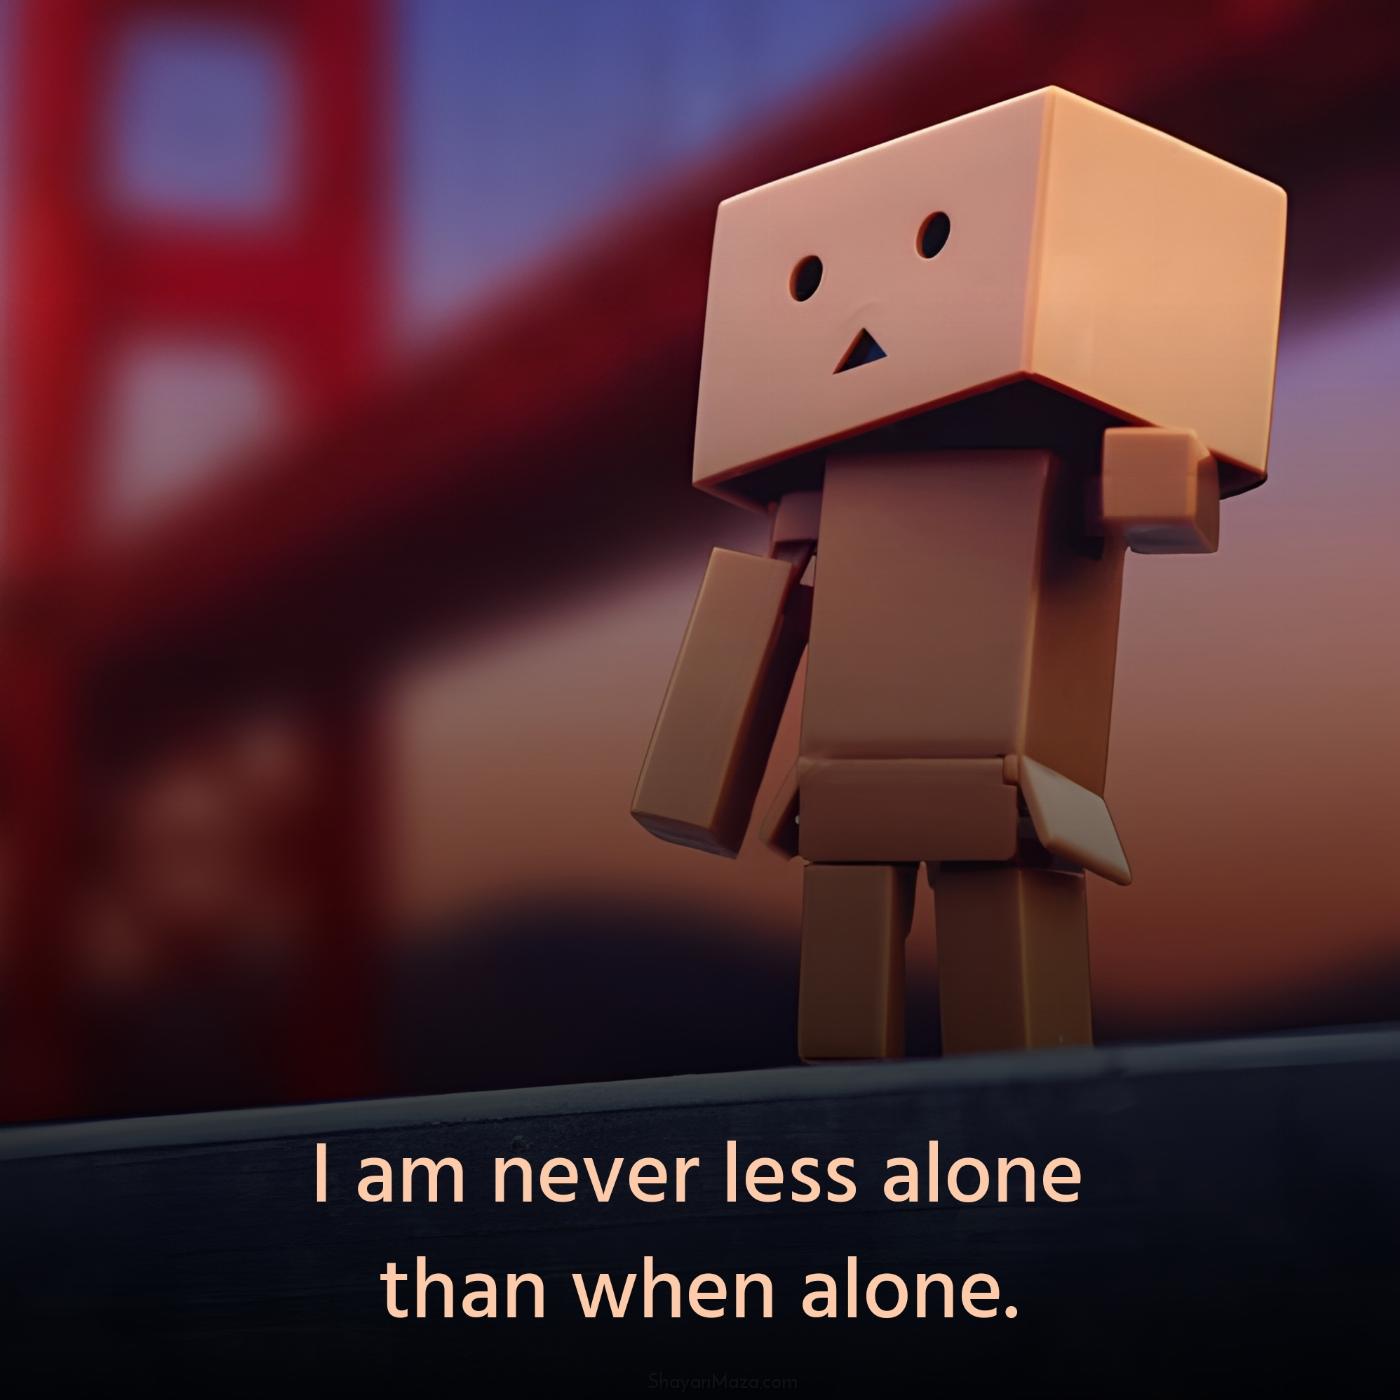 I am never less alone than when alone